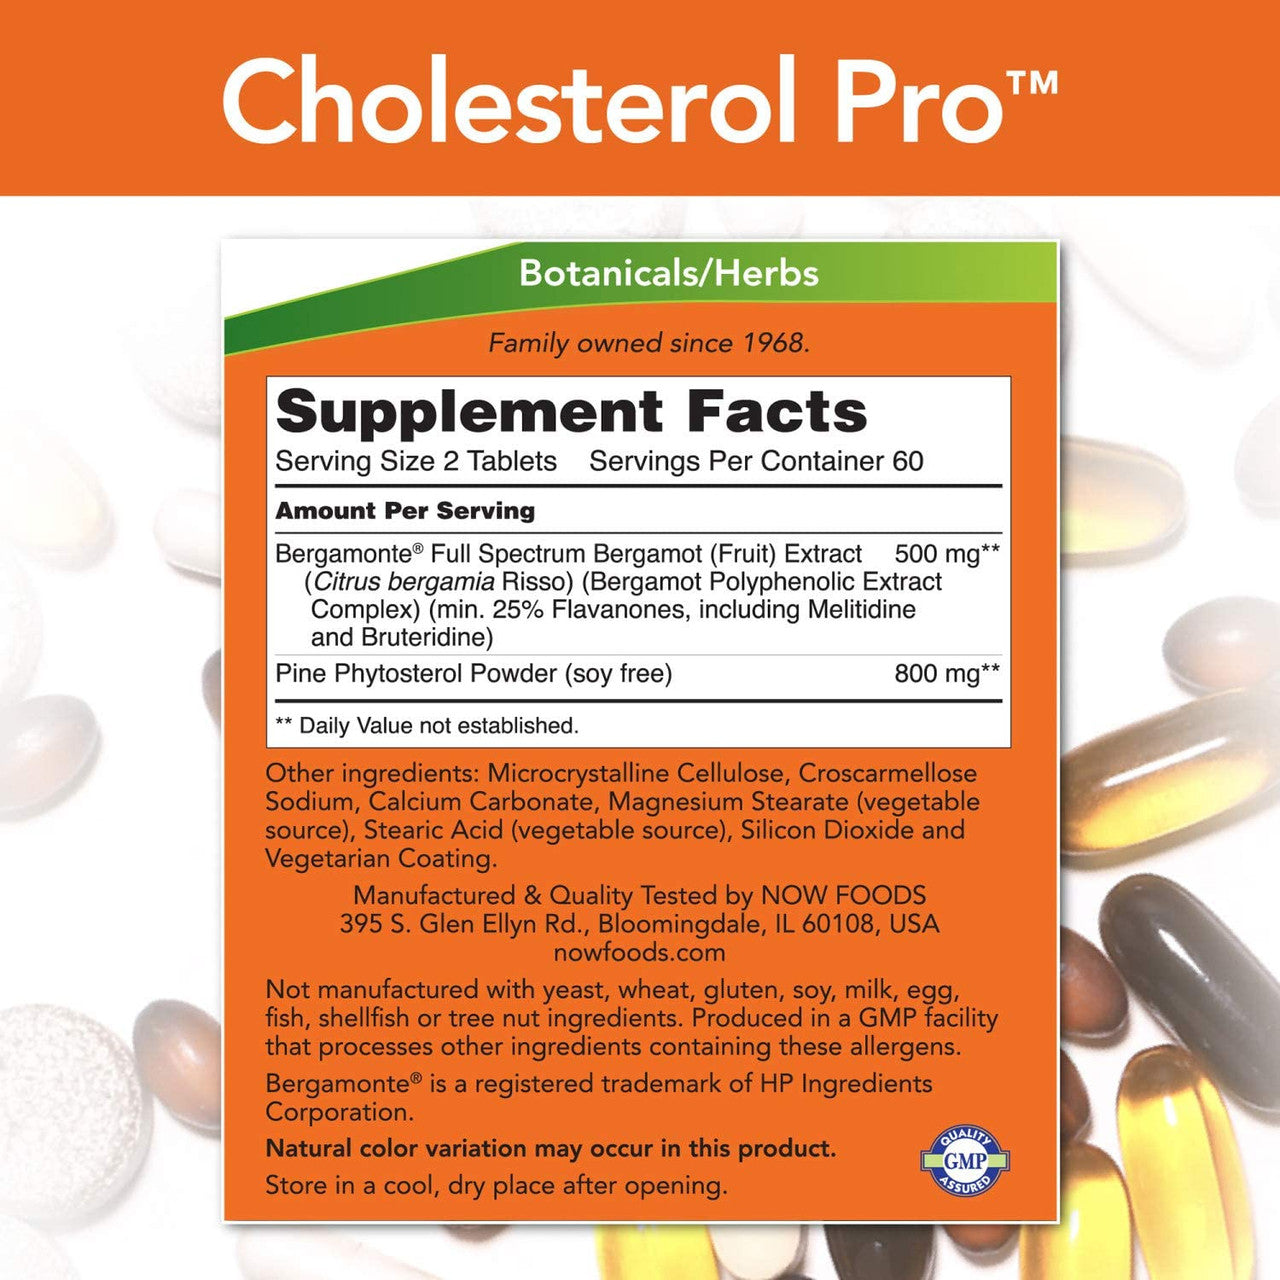 Now Cholesterol Pro supplement facts